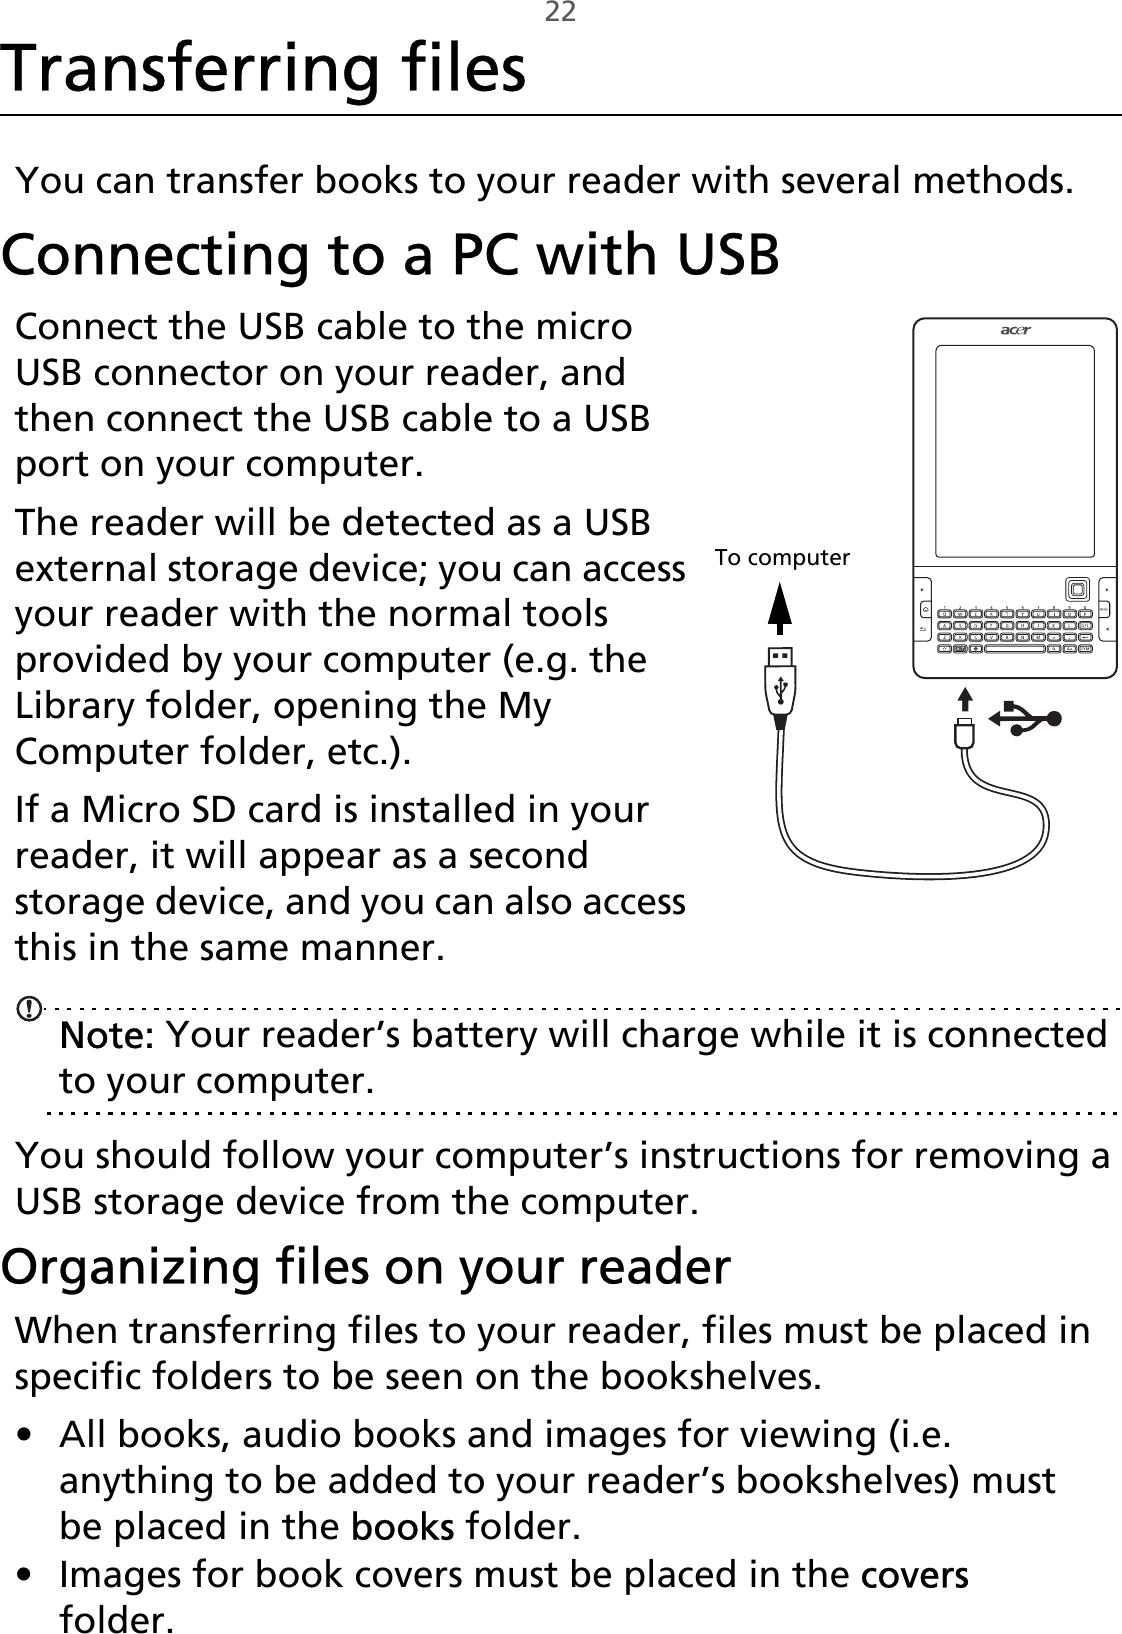 22Transferring filesYou can transfer books to your reader with several methods.Connecting to a PC with USB,To computerConnect the USB cable to the micro USB connector on your reader, and then connect the USB cable to a USB port on your computer. The reader will be detected as a USB external storage device; you can access your reader with the normal tools provided by your computer (e.g. the Library folder, opening the My Computer folder, etc.).If a Micro SD card is installed in your reader, it will appear as a second storage device, and you can also access this in the same manner.Note: Your reader’s battery will charge while it is connected to your computer.You should follow your computer’s instructions for removing a USB storage device from the computer.Organizing files on your readerWhen transferring files to your reader, files must be placed in specific folders to be seen on the bookshelves.• All books, audio books and images for viewing (i.e. anything to be added to your reader’s bookshelves) must be placed in the books folder.• Images for book covers must be placed in the covers folder.